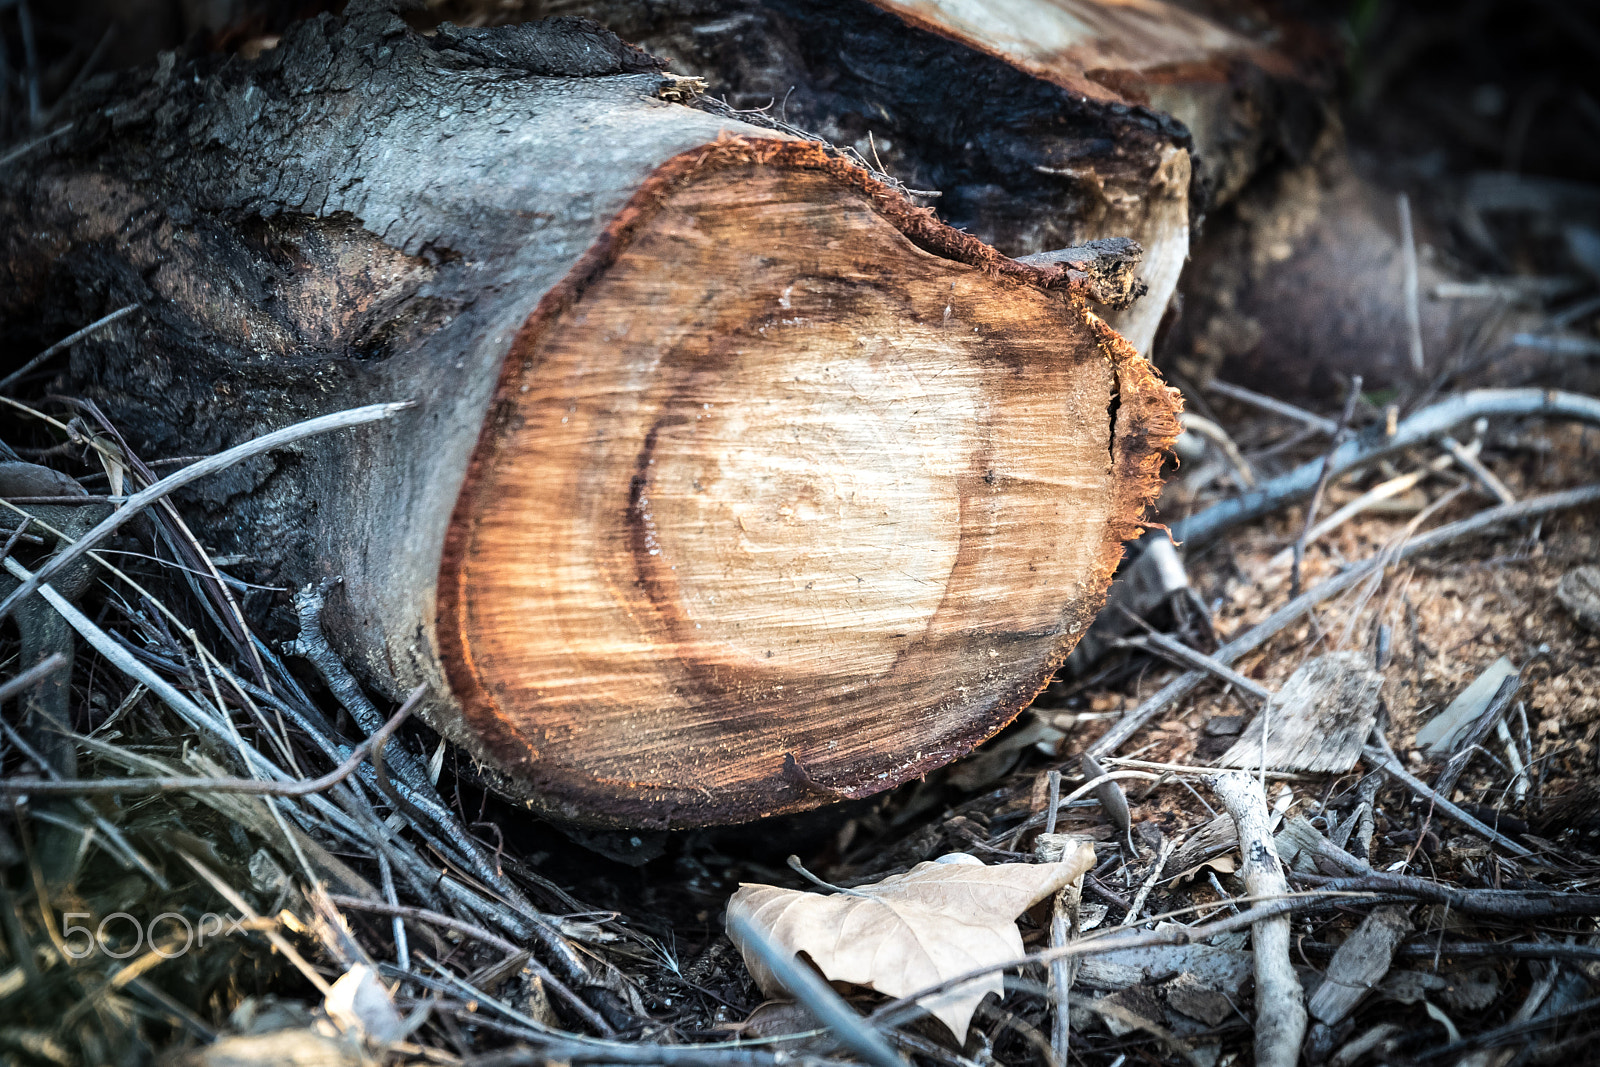 Nikon D5300 + Nikon AF-S Nikkor 70-200mm F2.8G ED VR II sample photo. Tree cross trunk showing growth rings photography